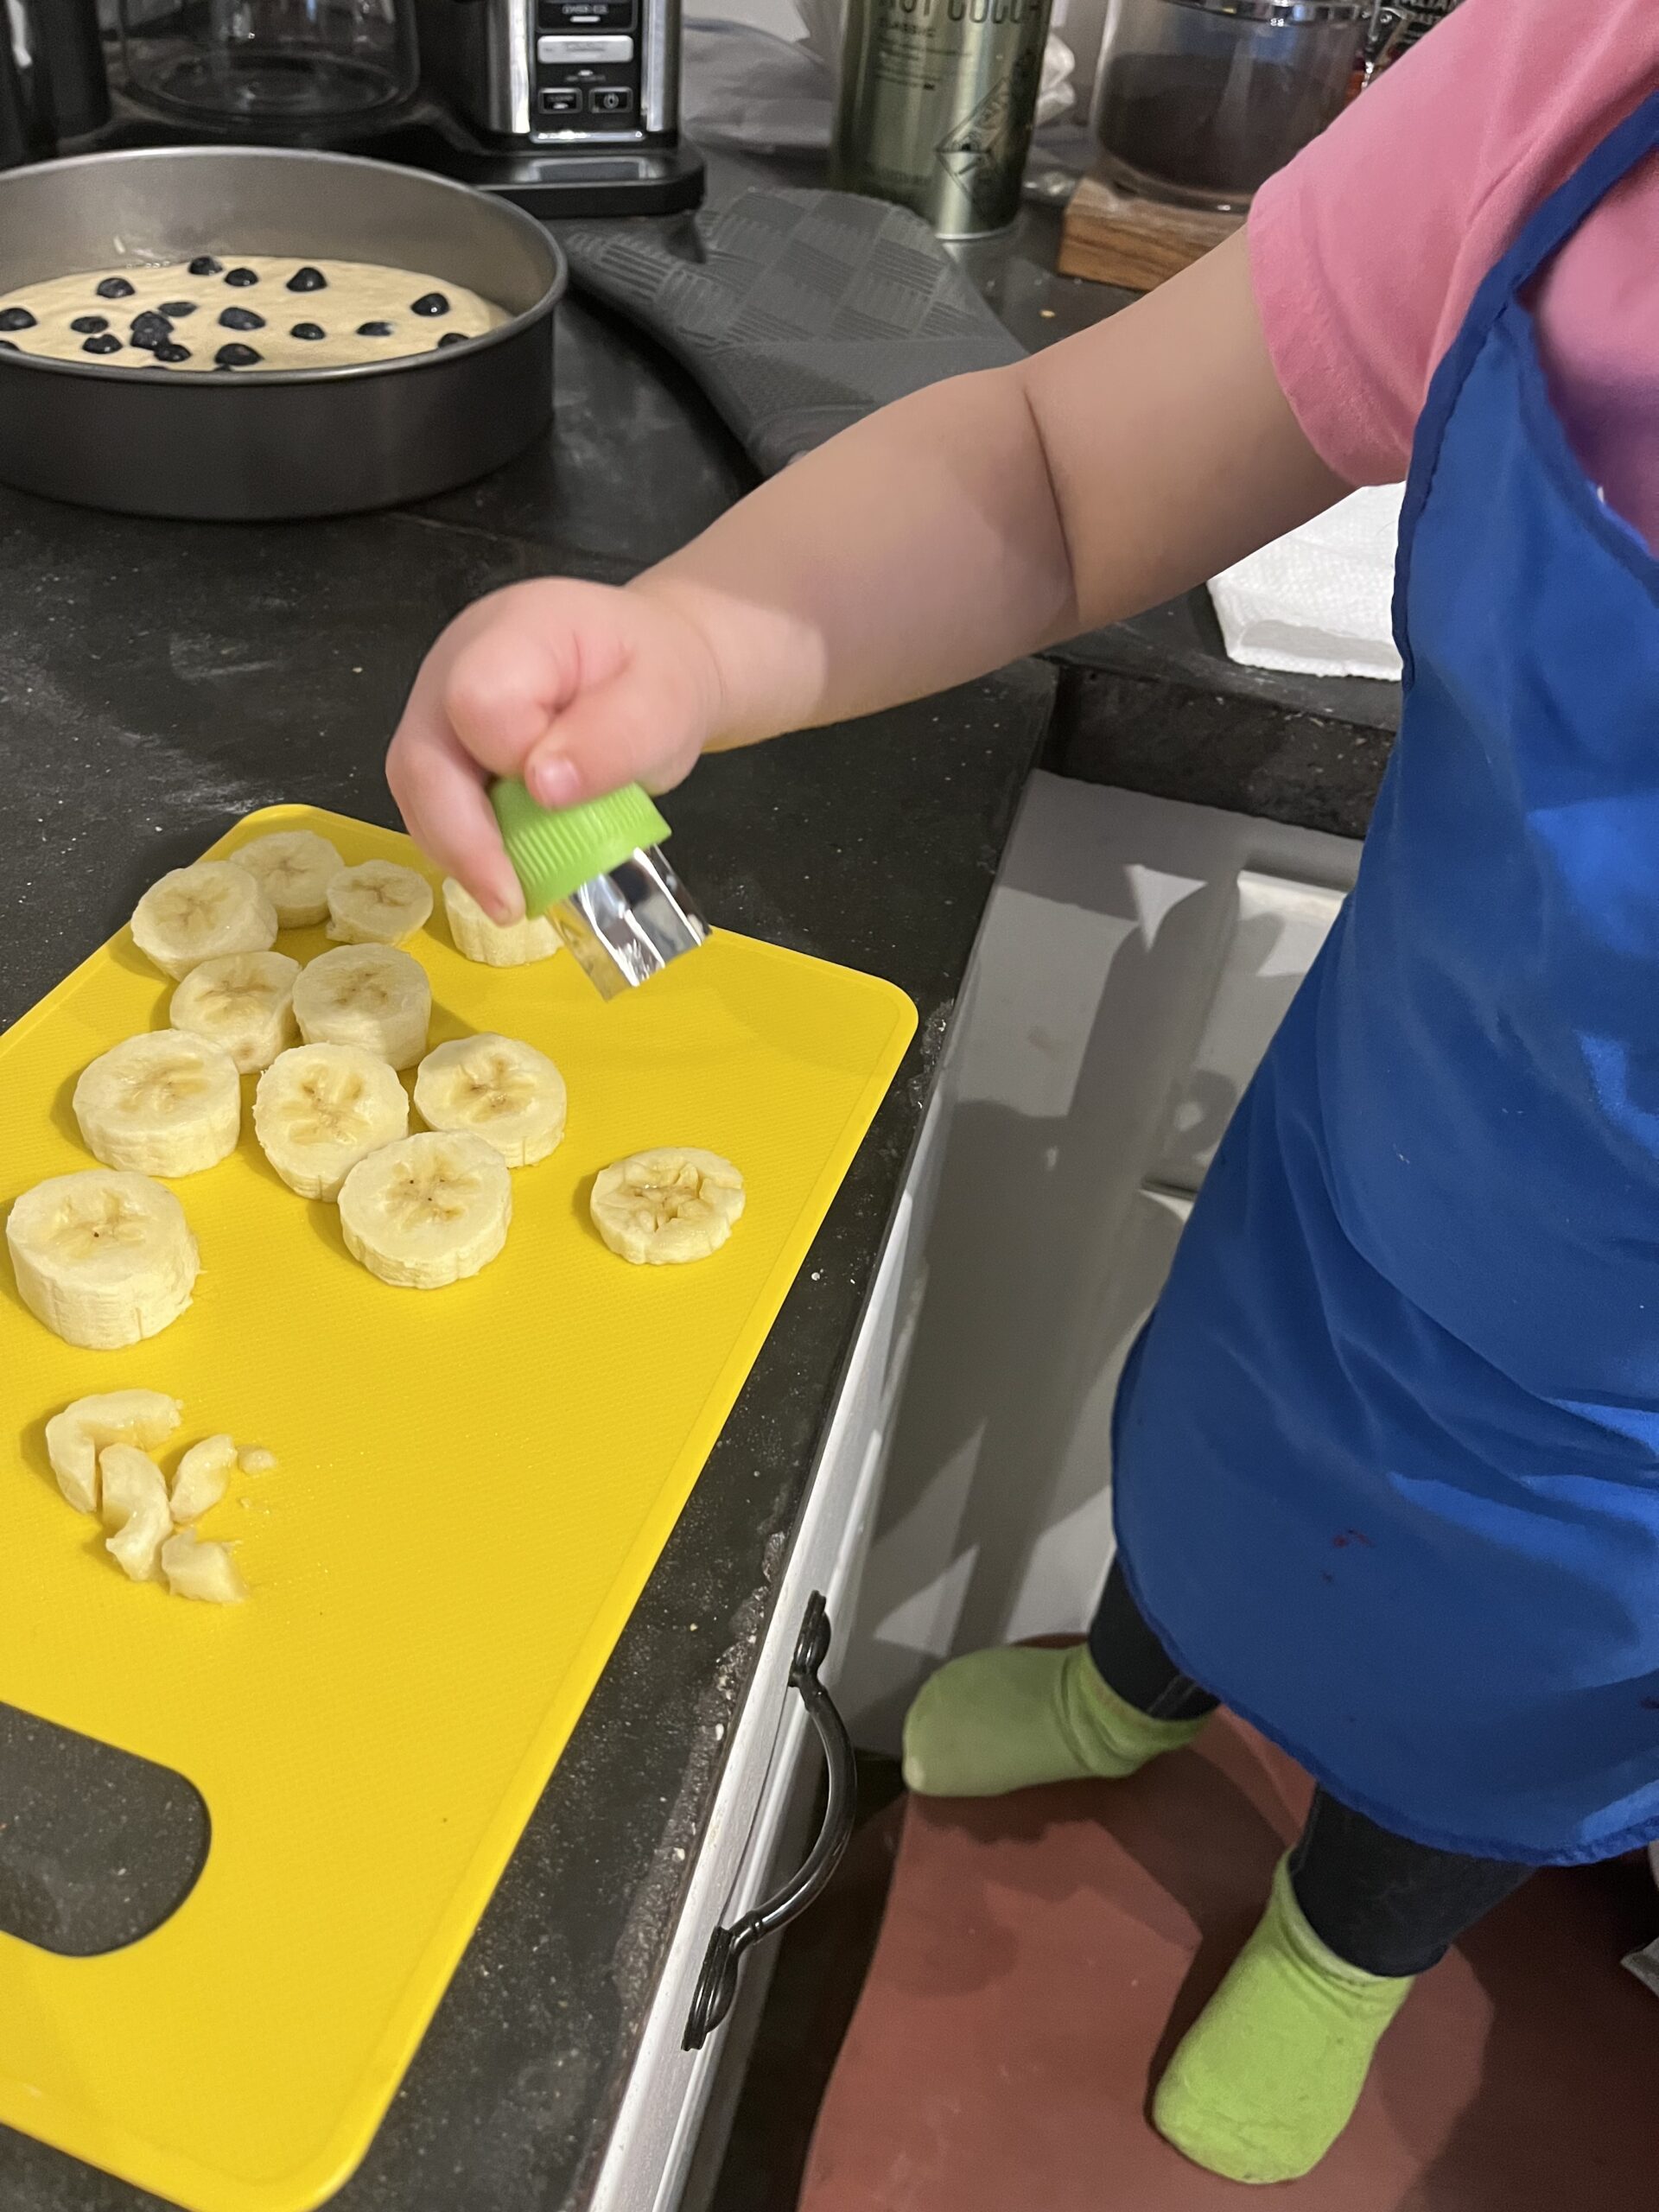 Toddle cutting shapes into bananas kitchen safety